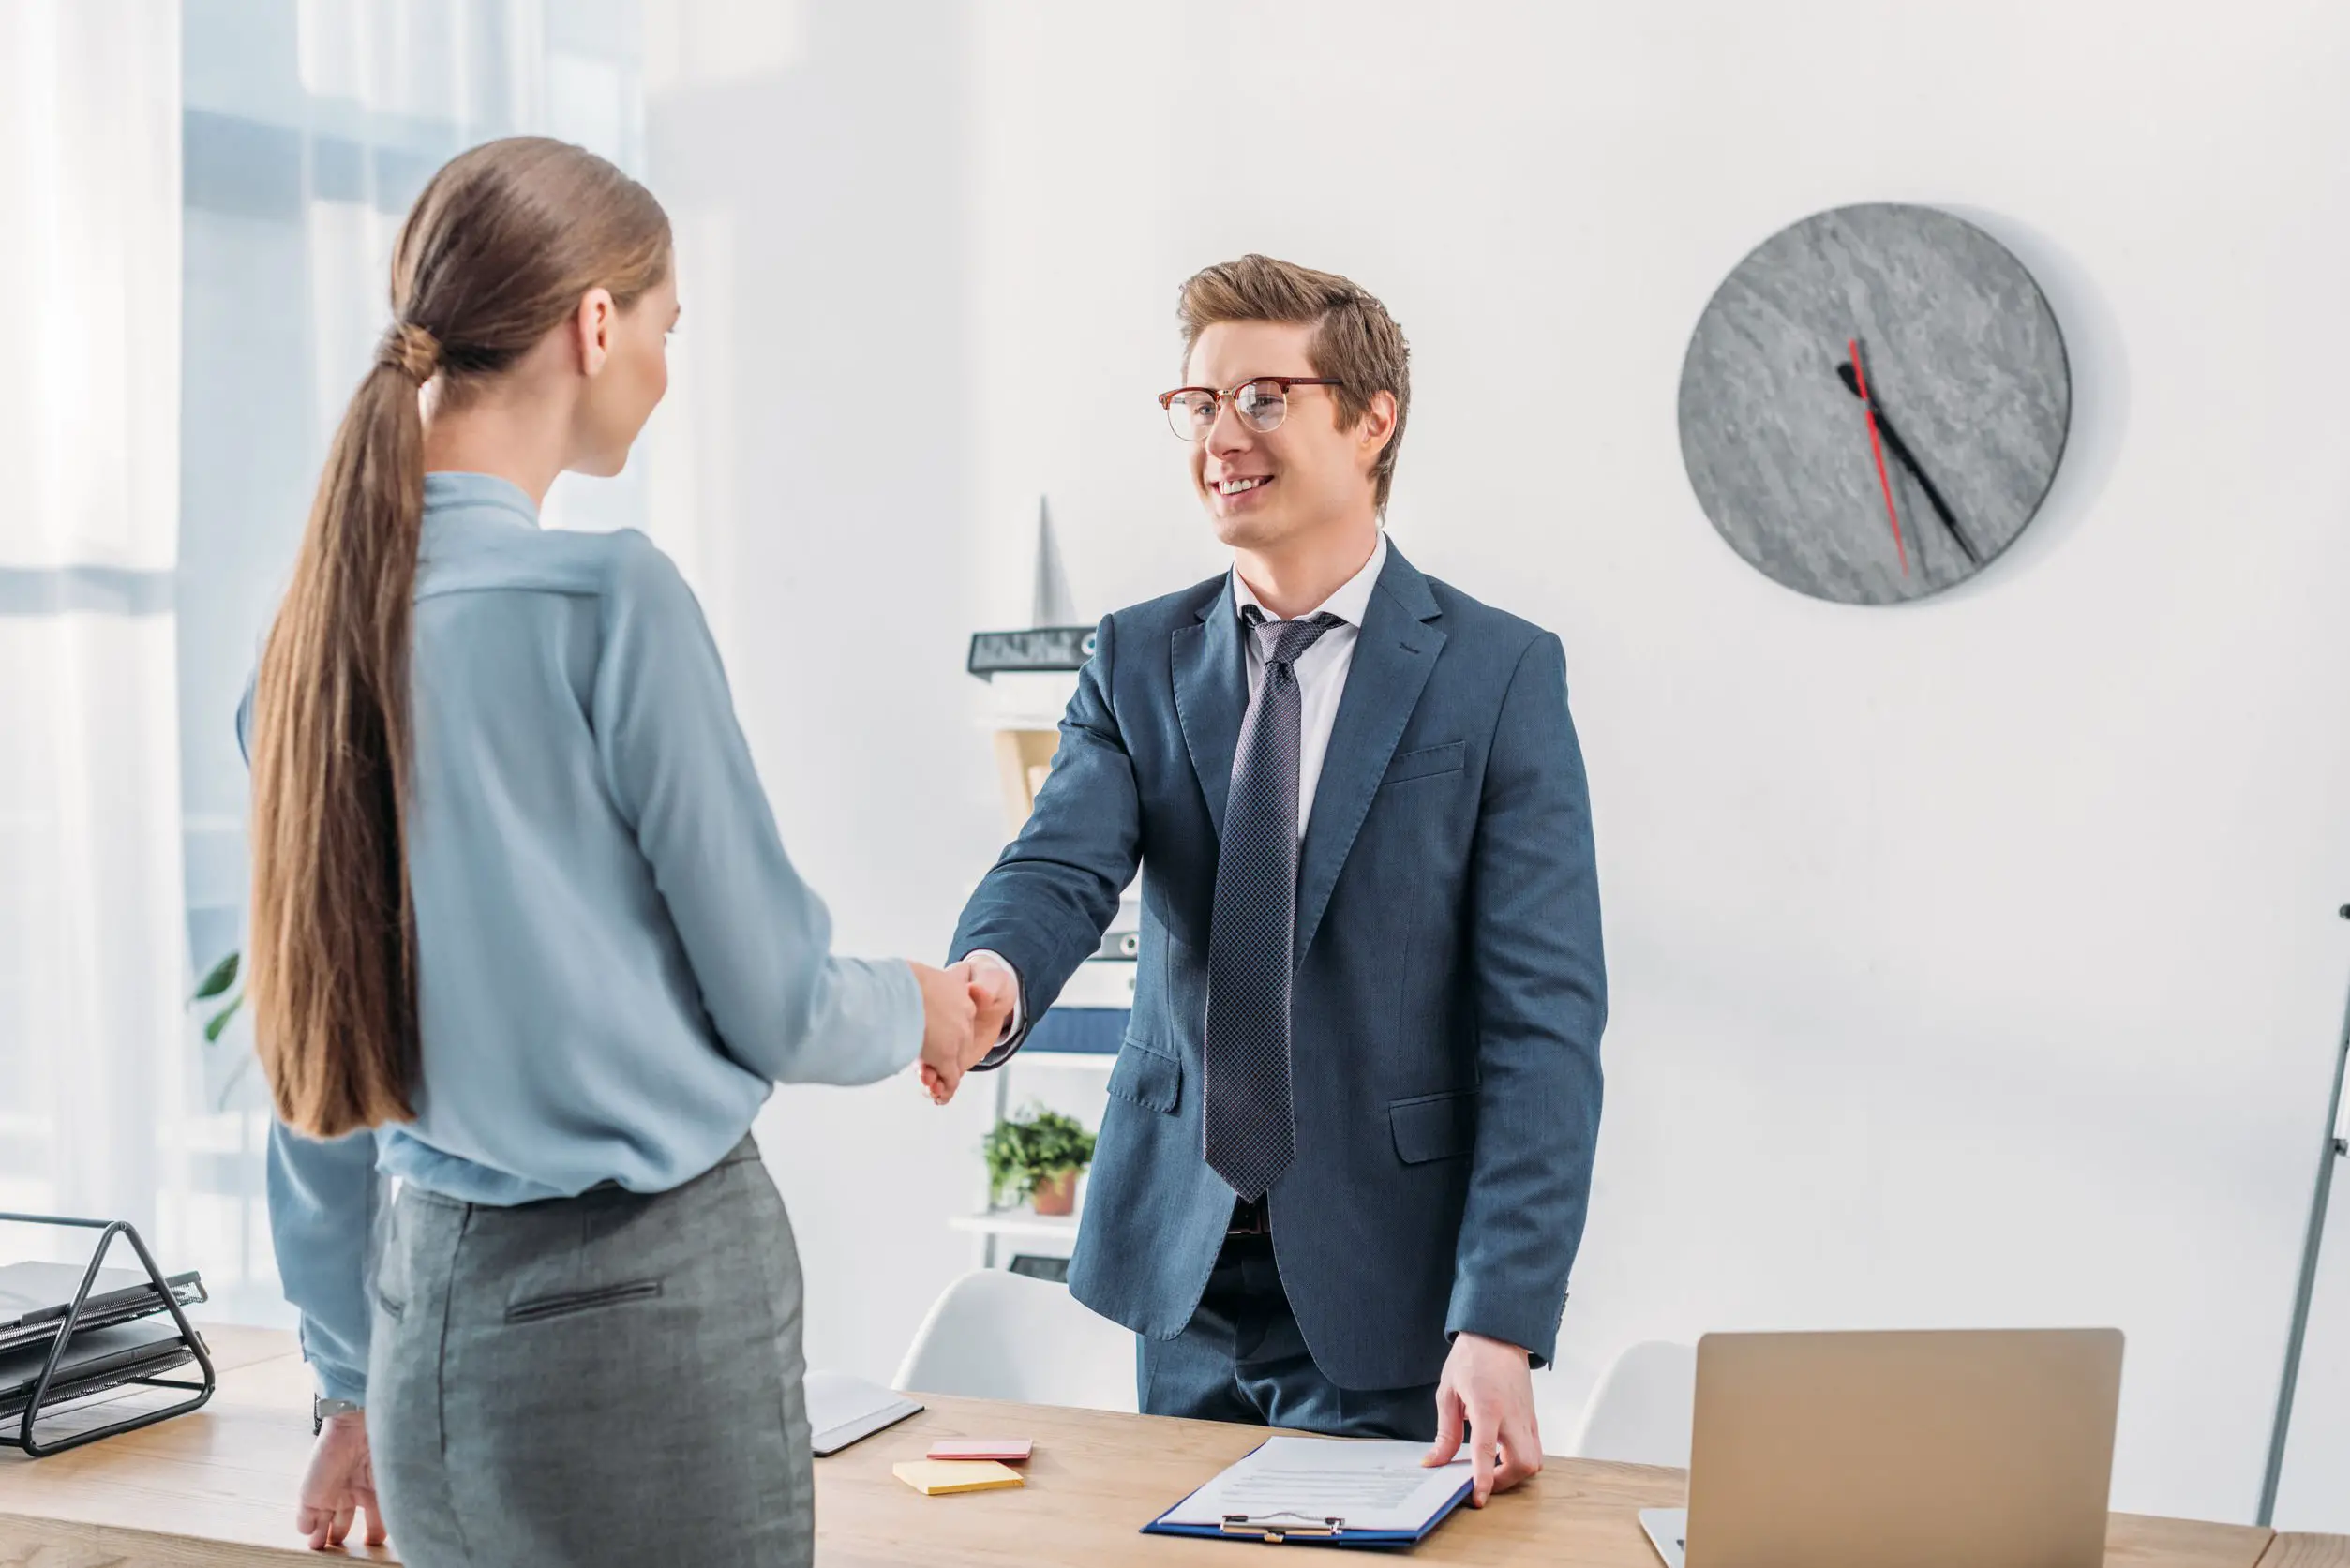 6 Ways to Make a Great Interview First Impression